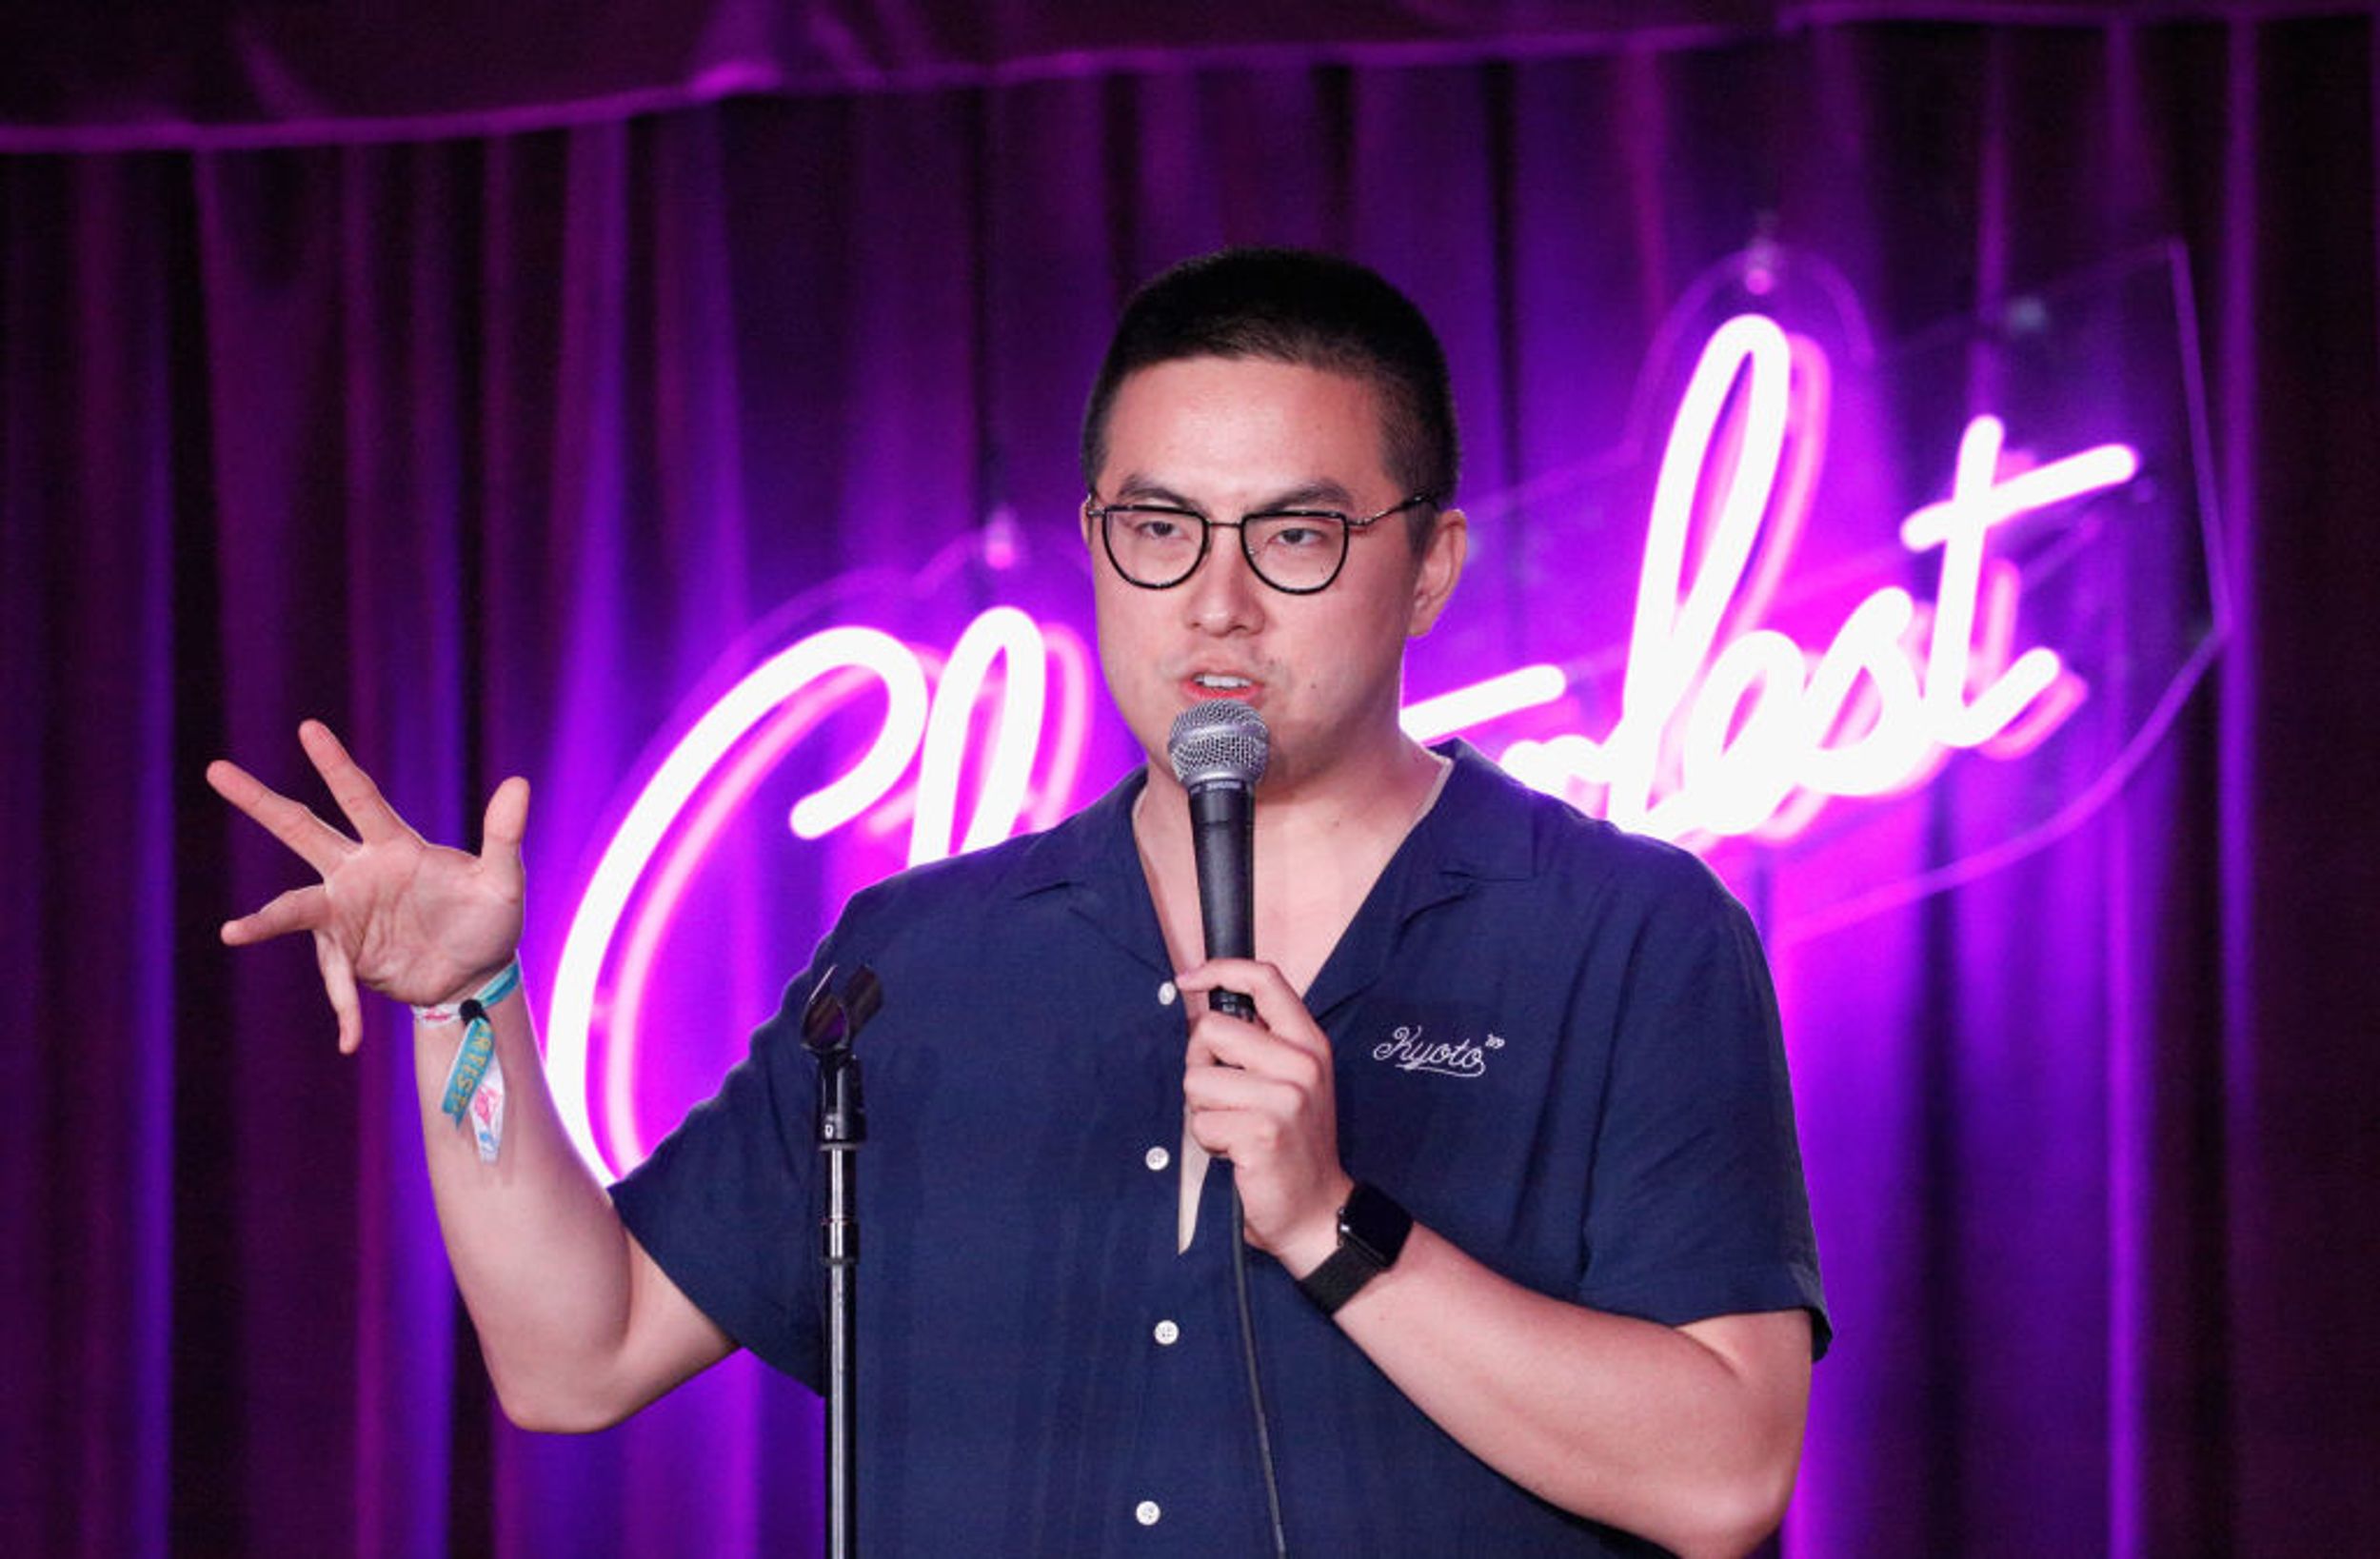 Comedian Bowen Yang Makes History As First Openly-Gay, Asian 'Saturday Night Live' Cast Member